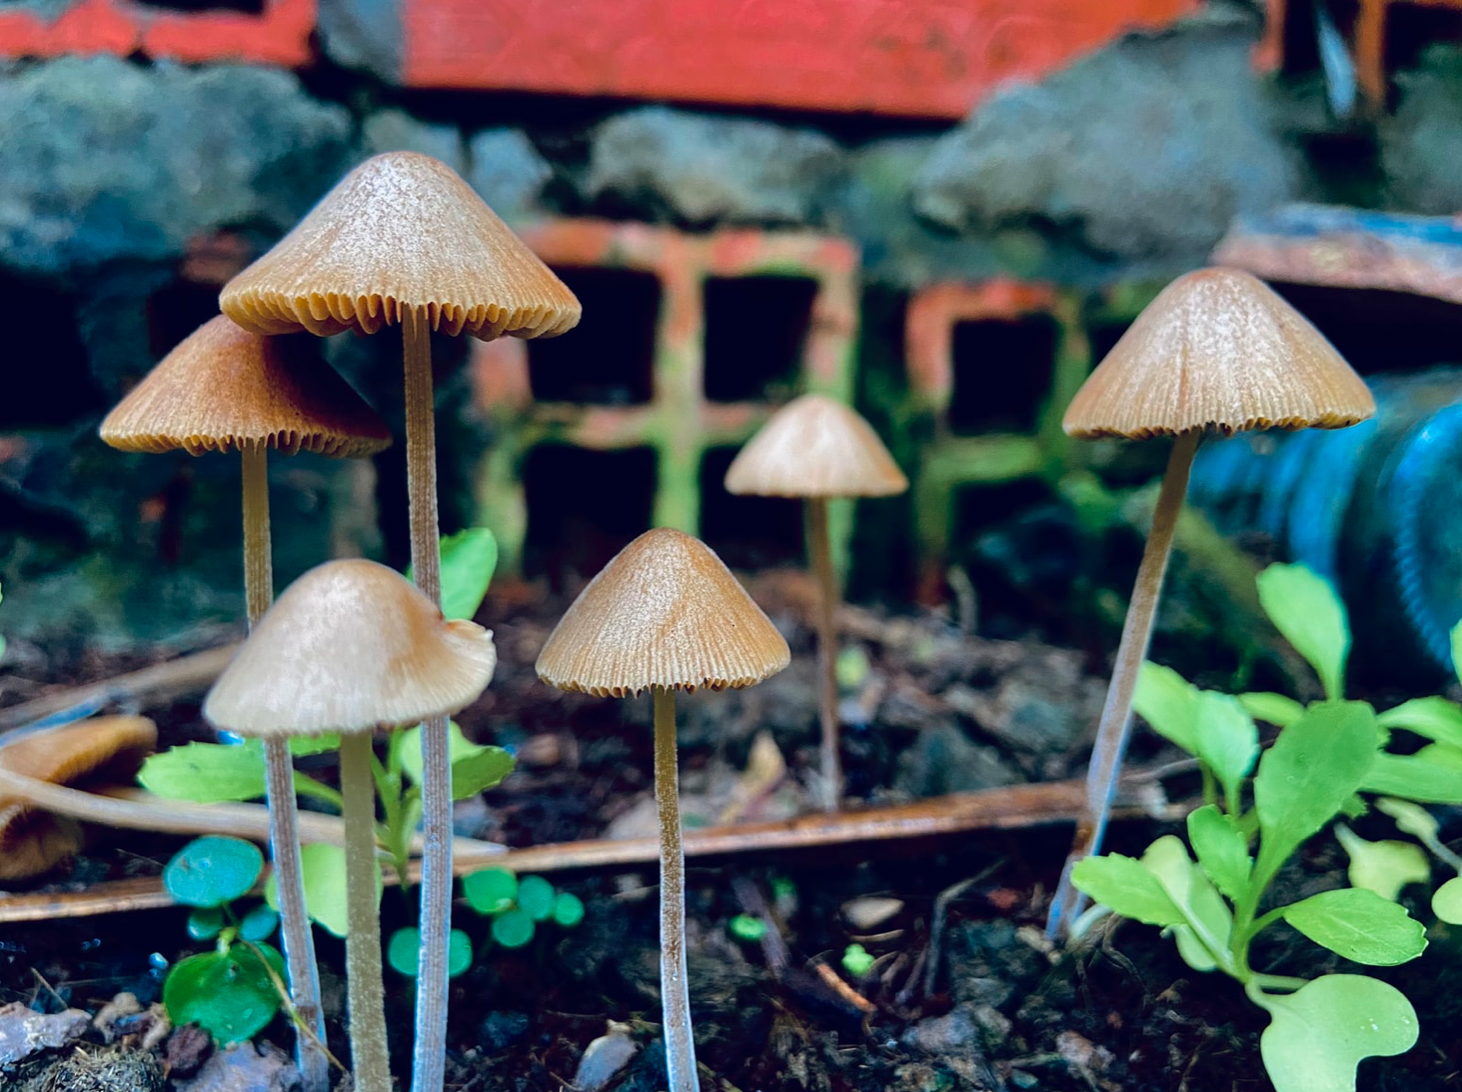 Growing Edible Mushrooms at Home: Where to Start Image